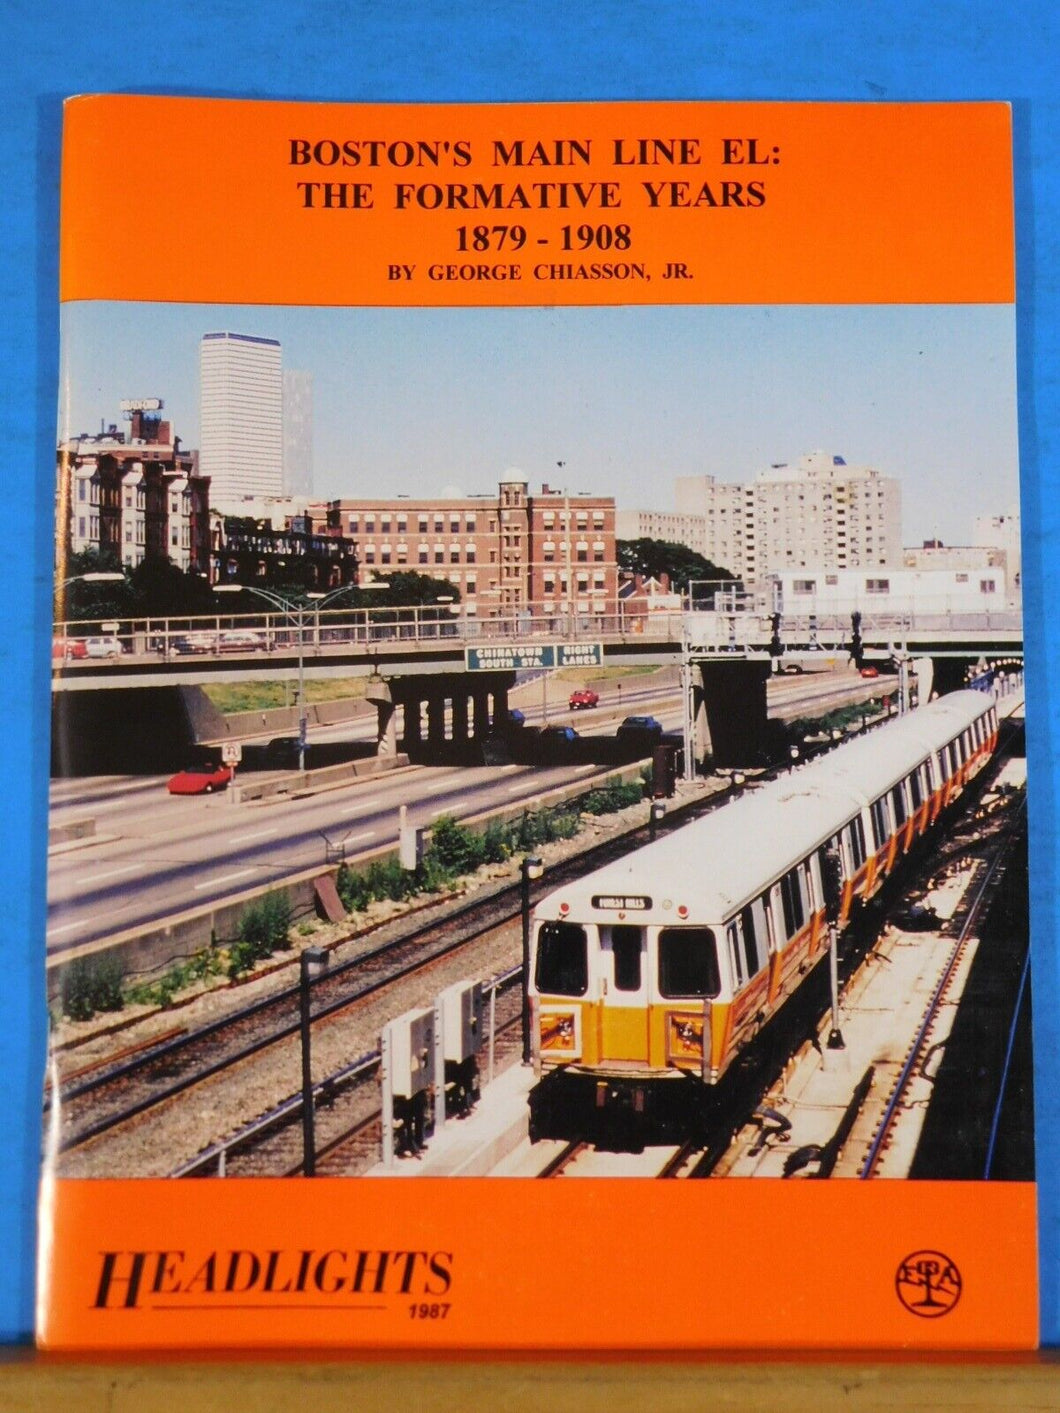 Boston’s Main Line El The Formative Years 1879-1908 by George Chiasson Jr